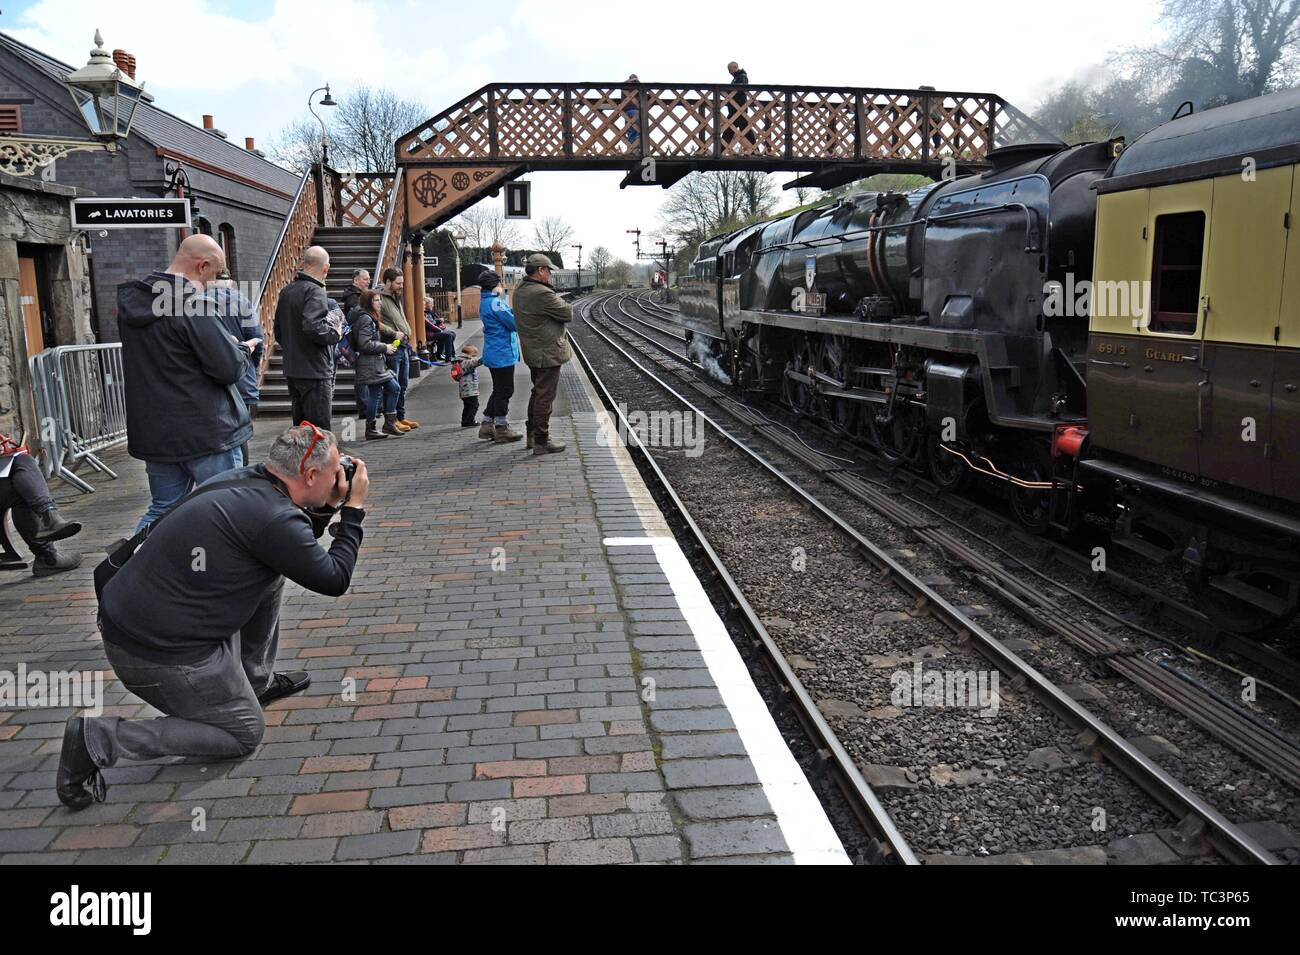 Rail enthusiasts photographing ex Southern Railway locomotive  34027 "Taw Valley" at Bridgnorth station on the Severn Valley Railway Stock Photo